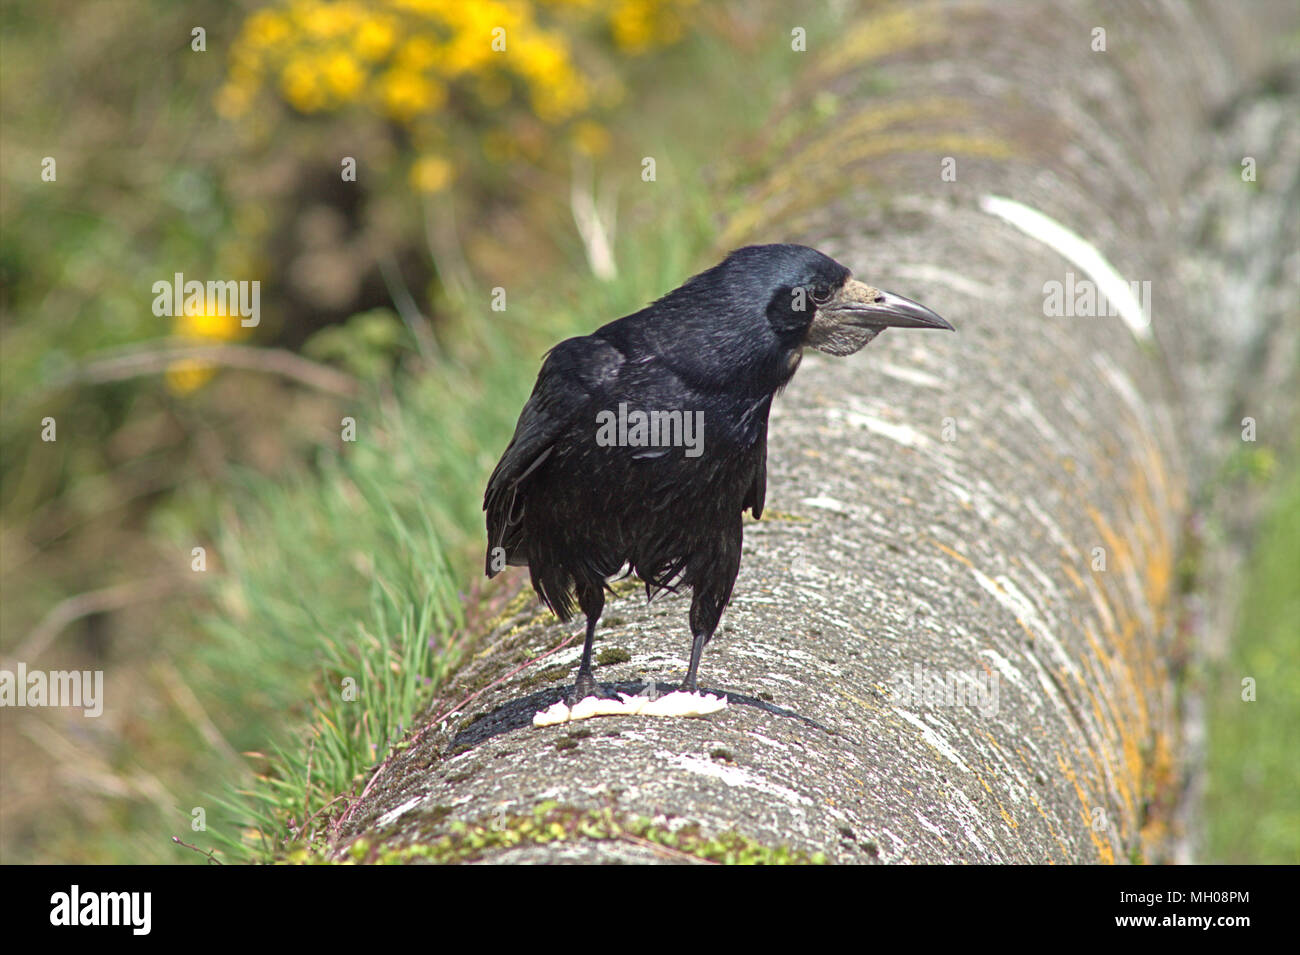 Corvus frugilegus, common rook, in full adult plumage perched on a stone wall watching the waters edge for food. Stock Photo